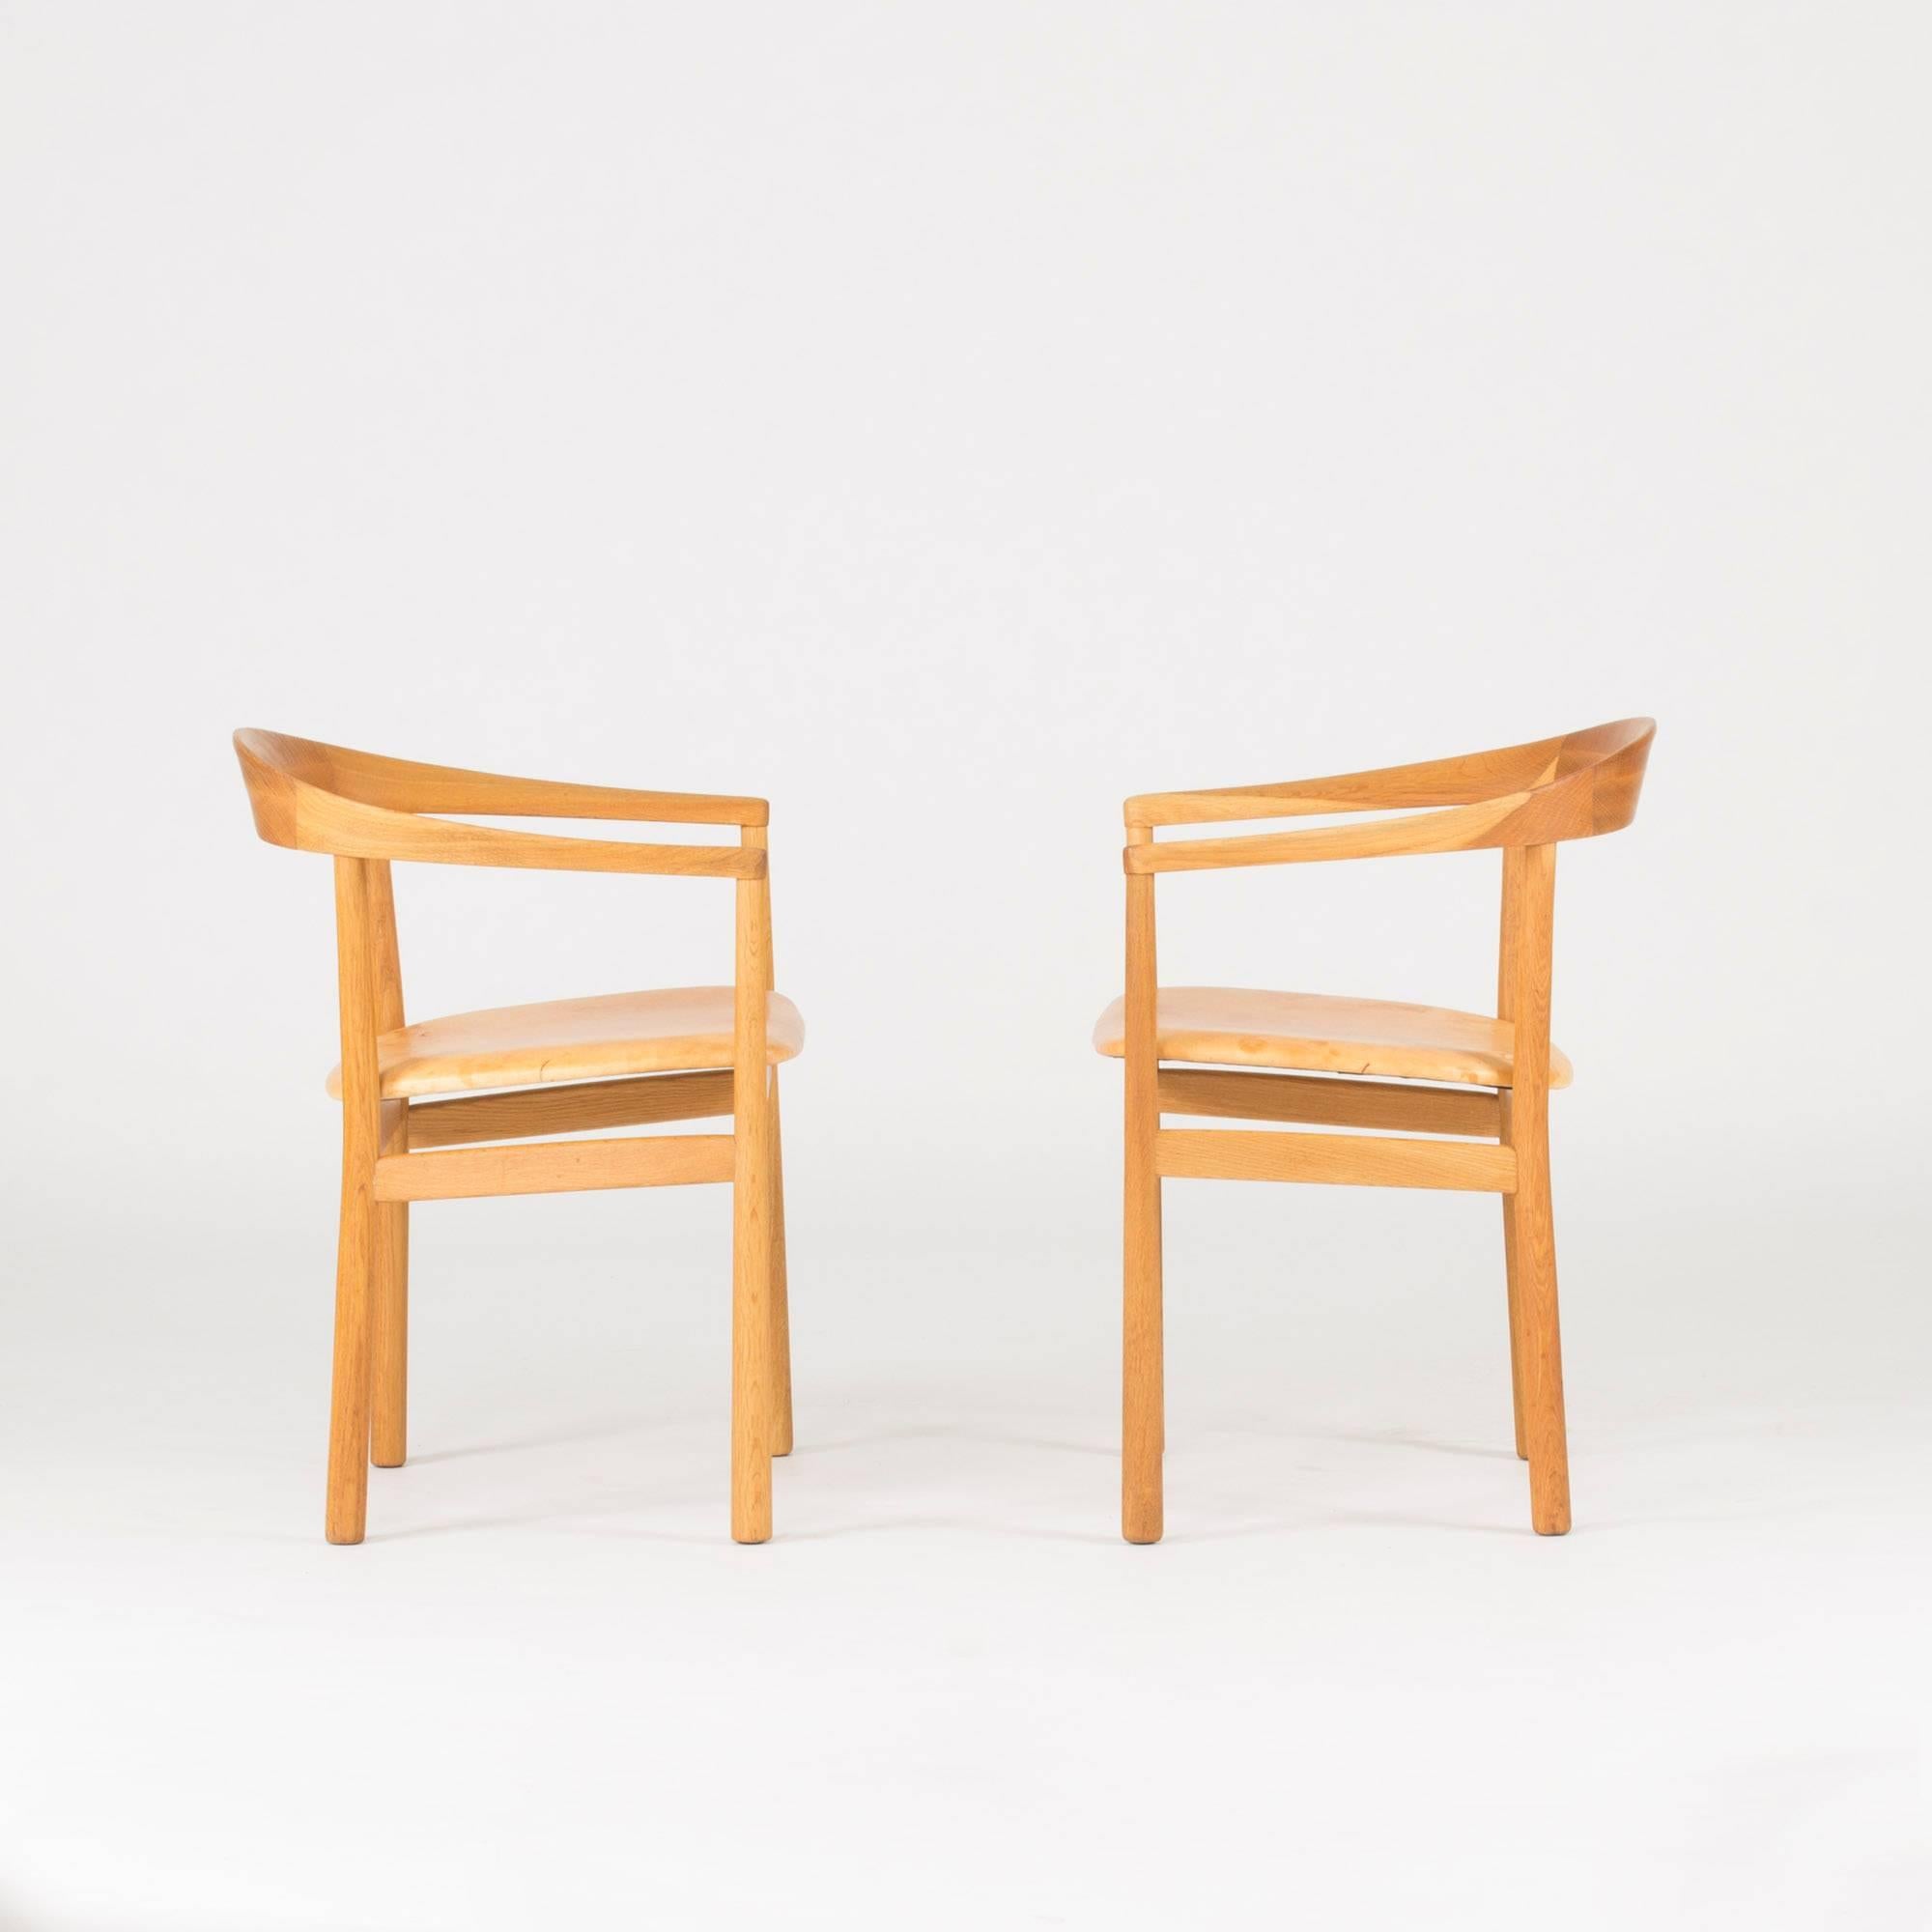 Pair of beautiful “Tokyo” armchairs by Carl-Axel Acking, made from oak and upholstered with patinated blonde leather. The “Tokyo” model was created in 1959 for the Swedish embassy in Tokyo.